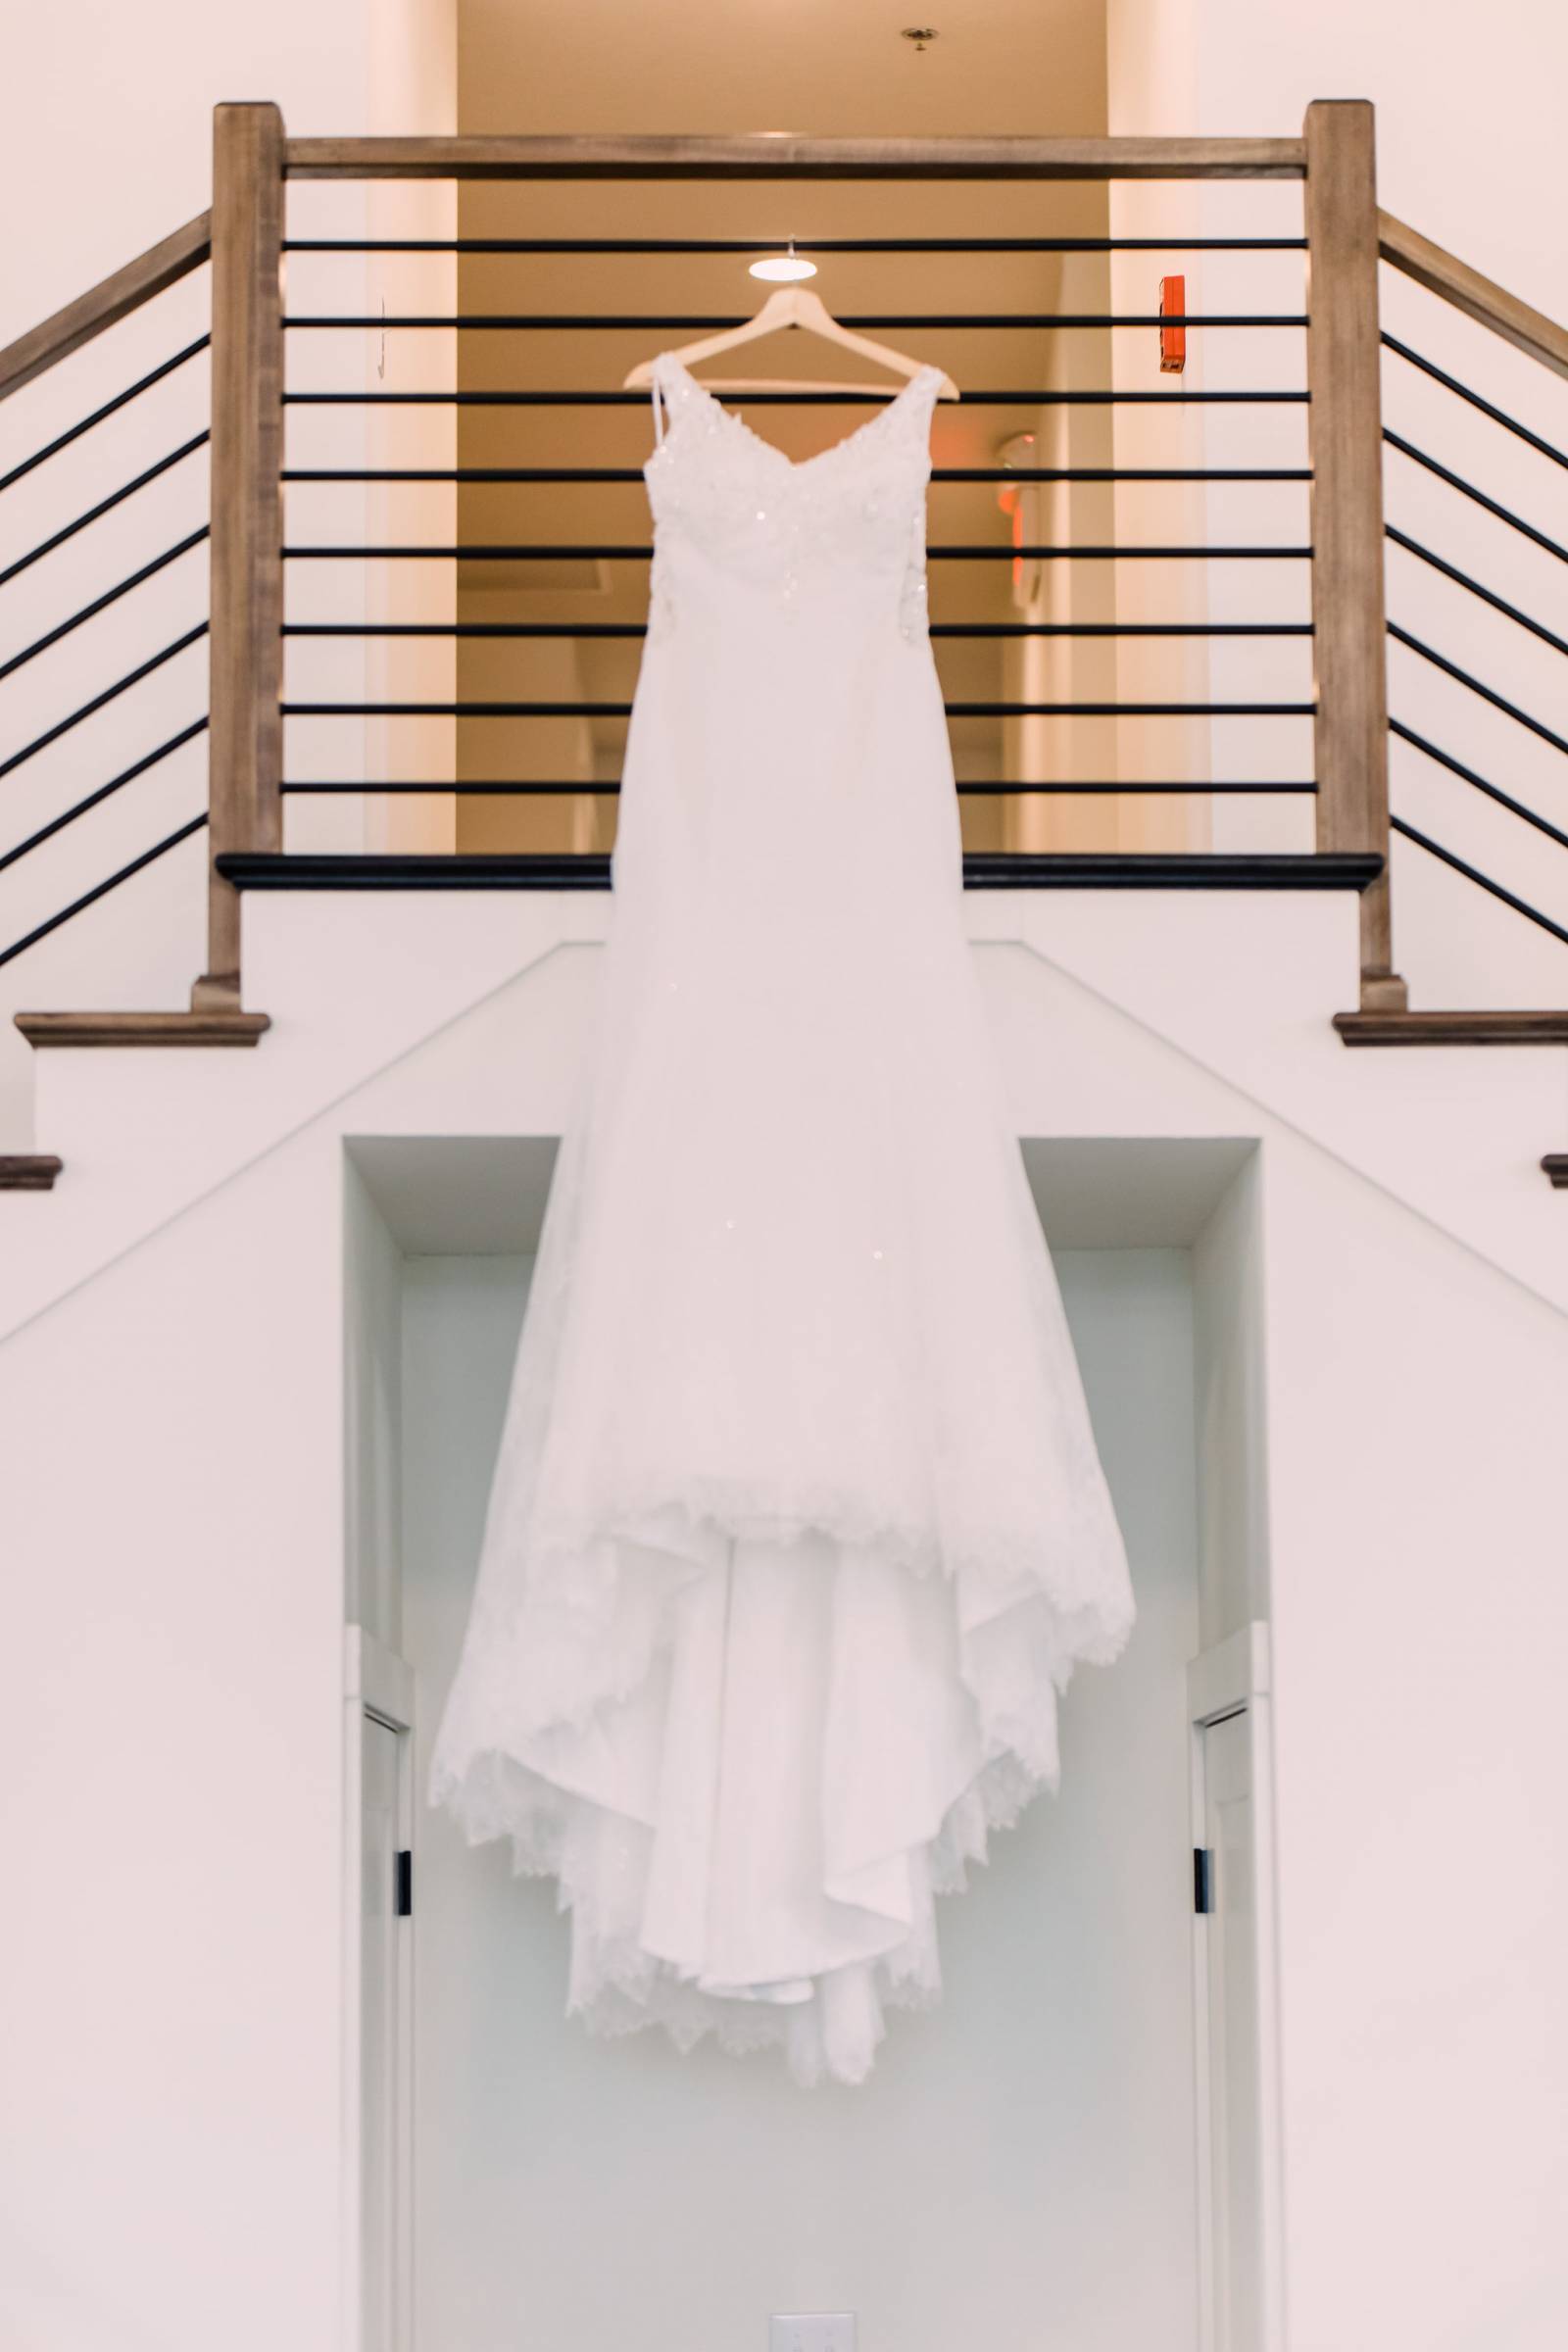 Hanging wedding gown